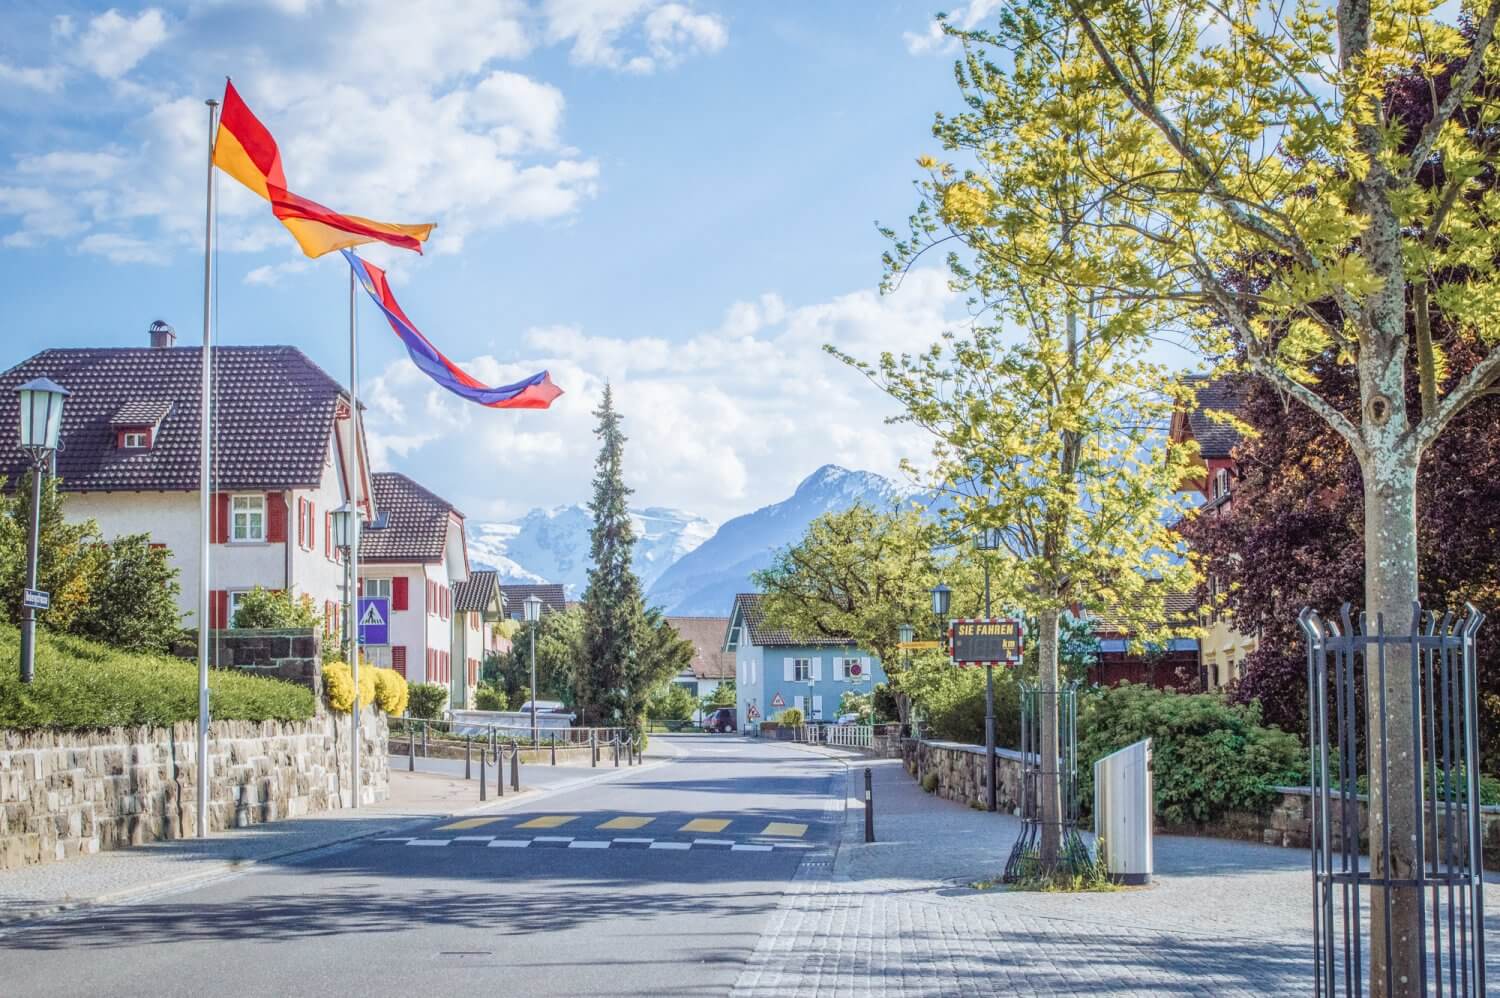 Wow! Absolutely stunning photos of Liechtenstein to ignite your wanderlust. This is one of the smallest countries in the world and one of Europe's most underrated gems. This photo guide to Liechtenstein will explain why. #Liechtenstein #Europe #Travel